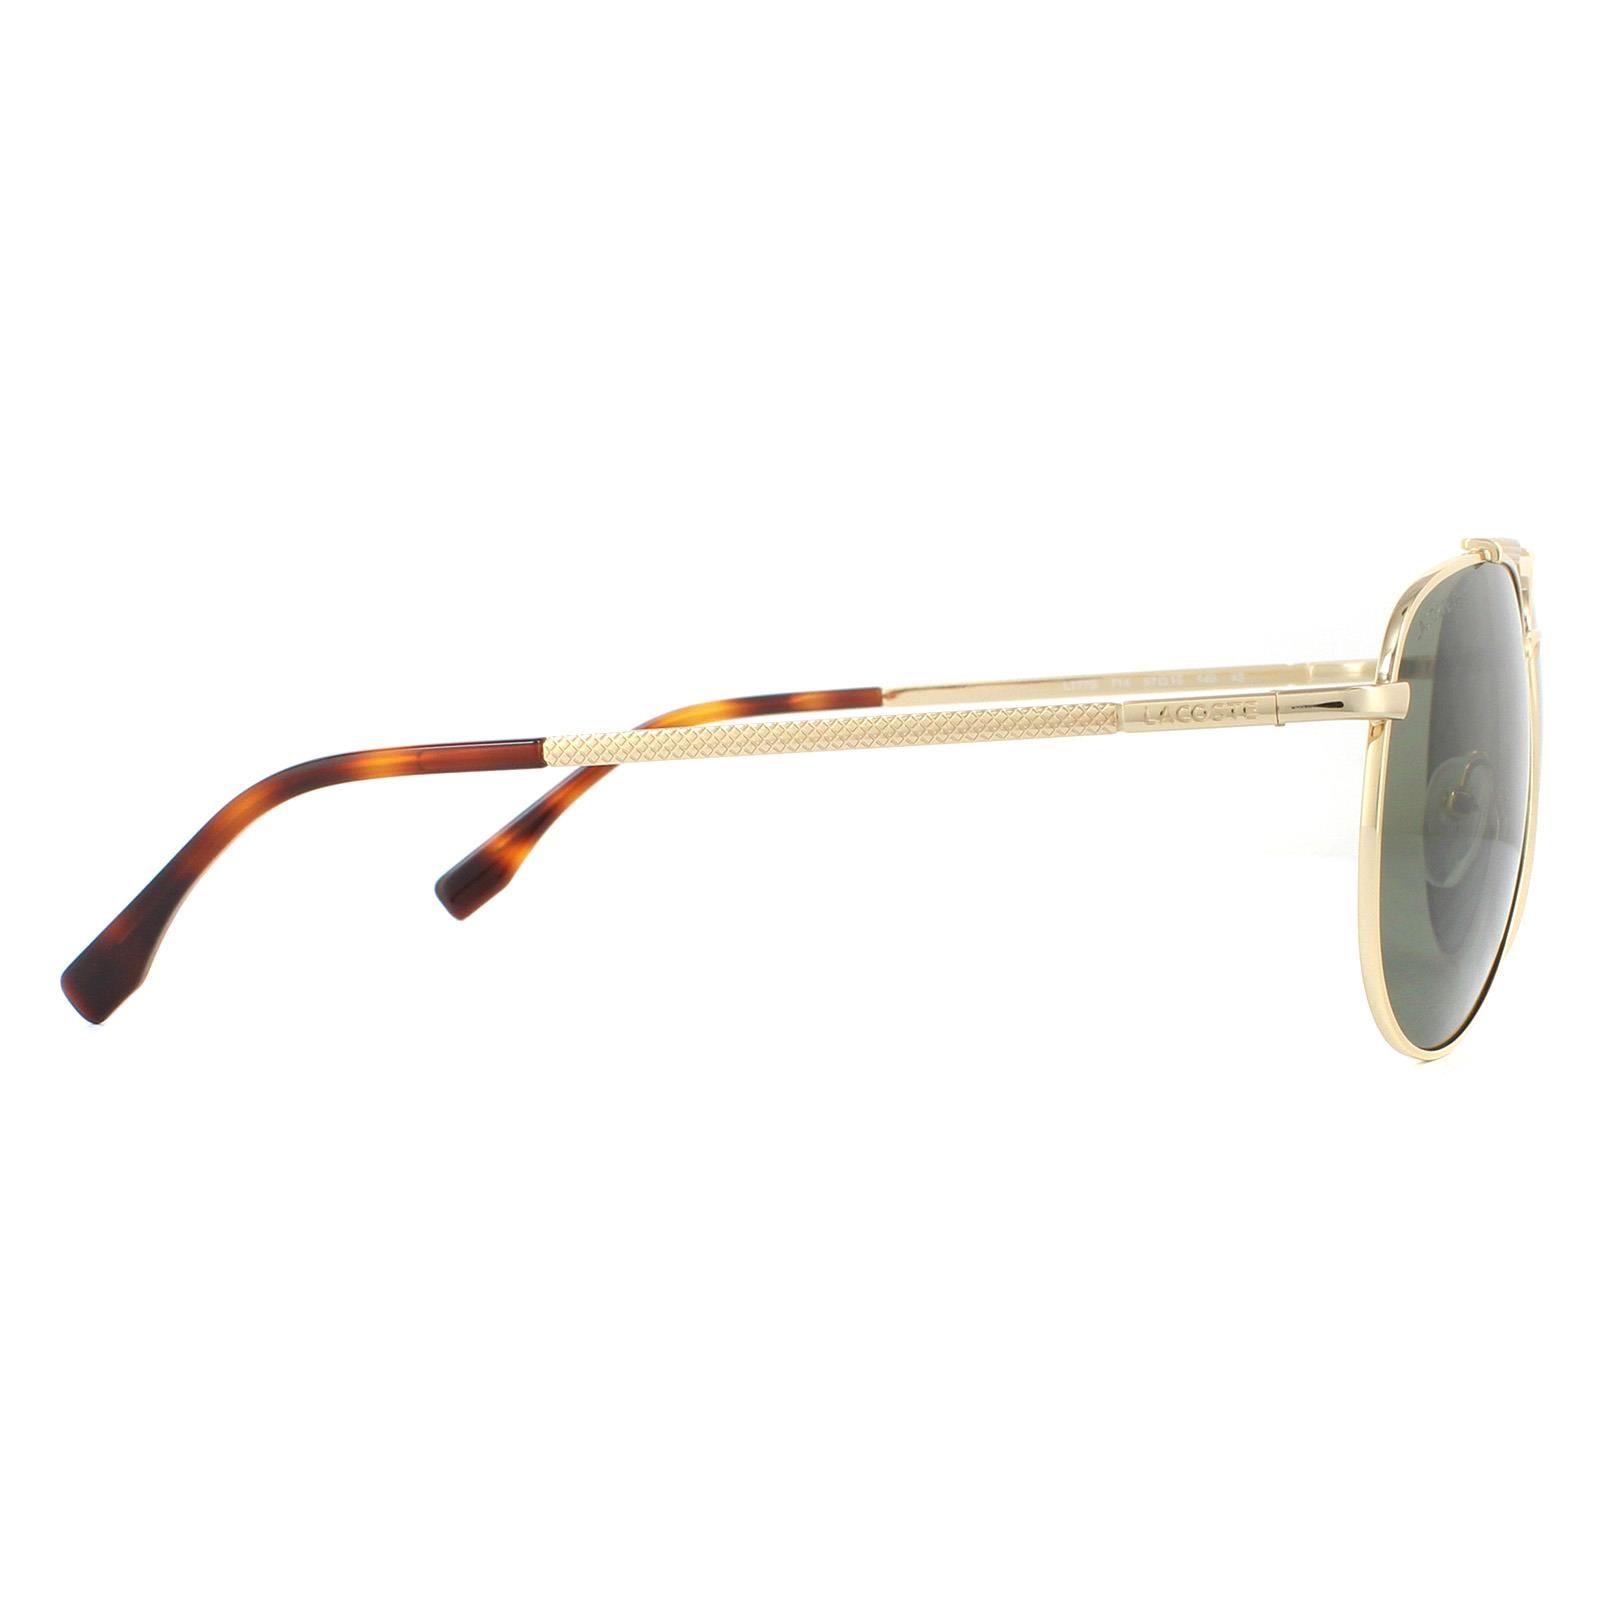 Lacoste Sunglasses L177S 714 Gold Grey are a classy pilot style with textured temples and matching brow bar for a luxurious chic finish. The Lacoste lettered logo at the temples completes these cool aviator Lacoste shades.